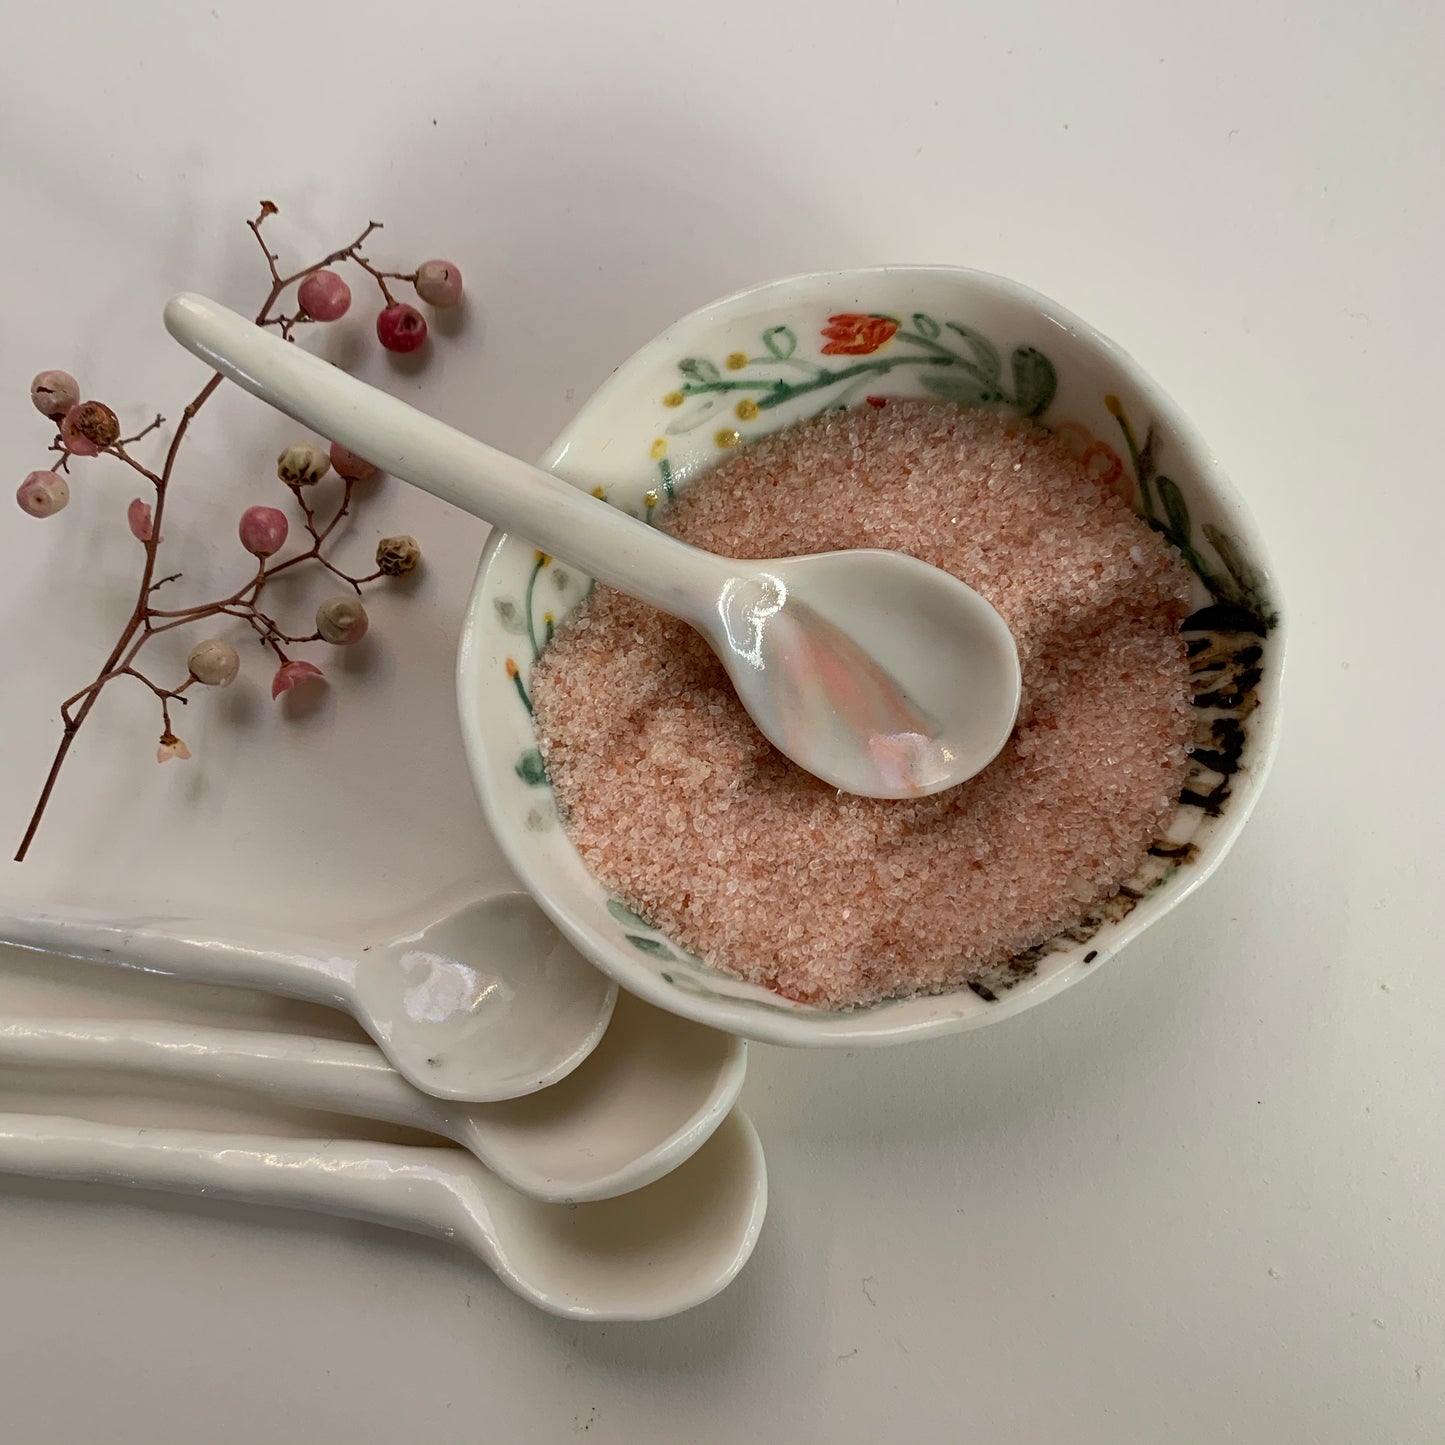 One porcelain small spoon